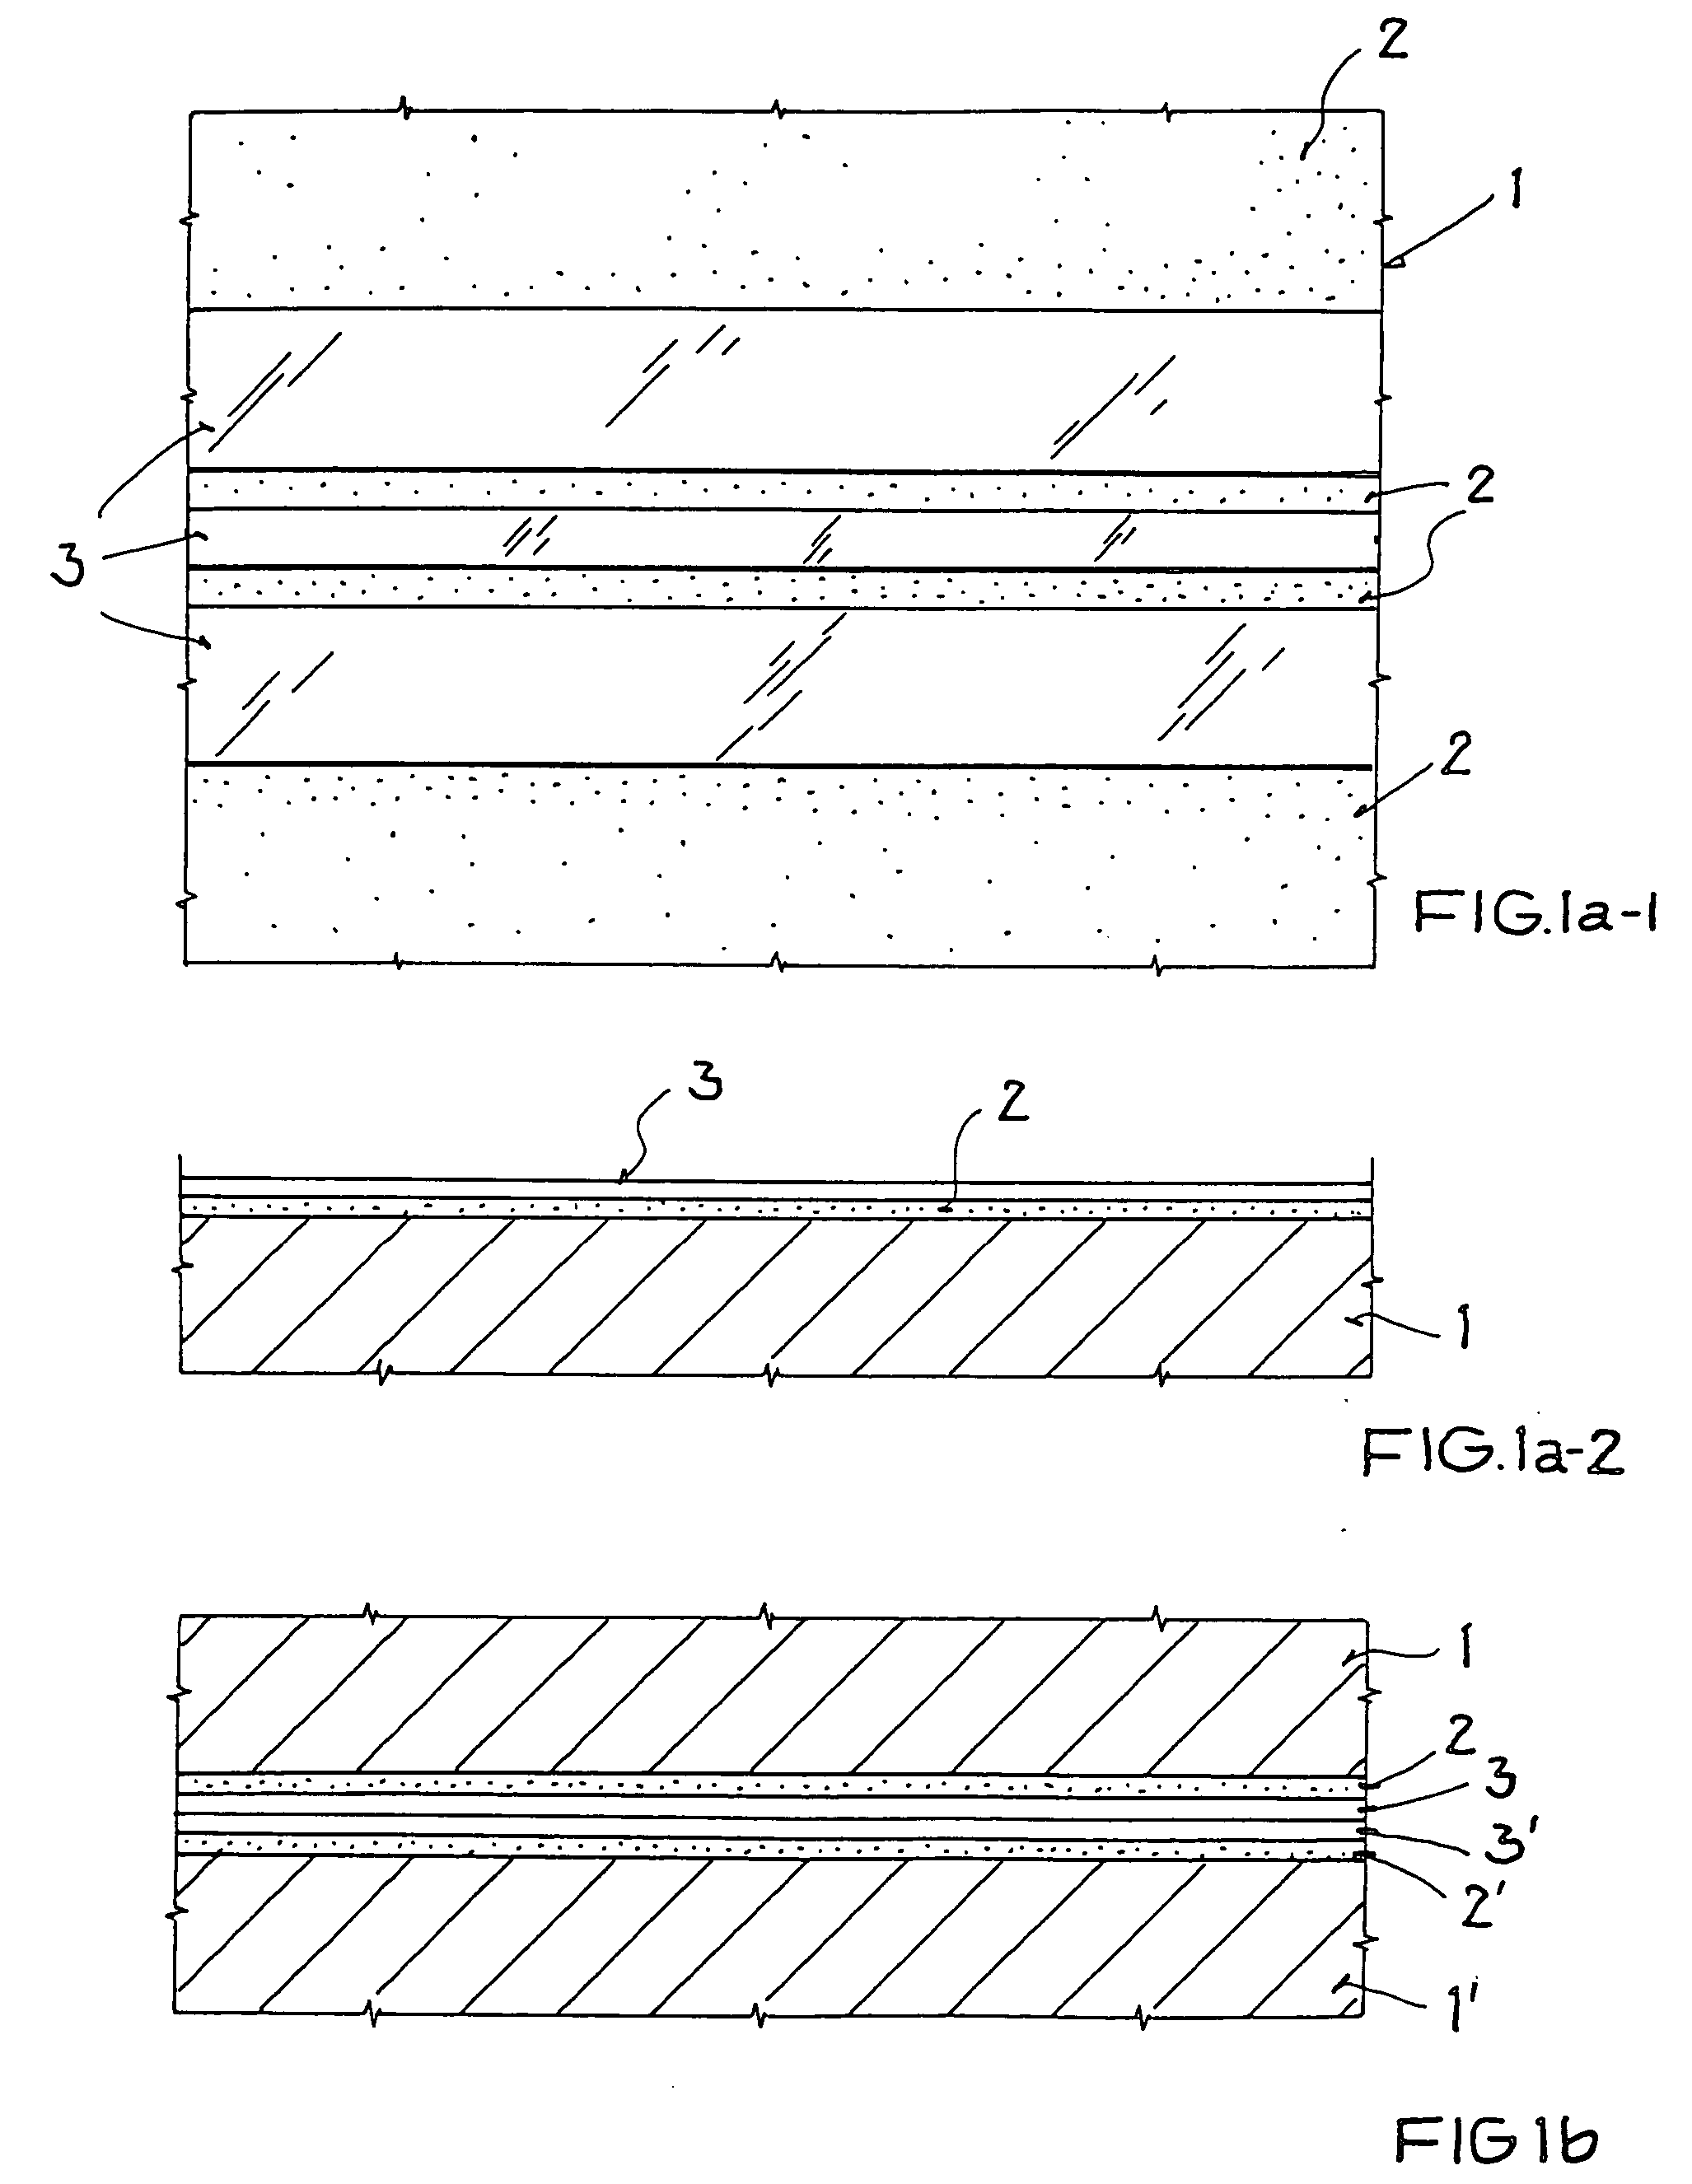 Method for forming a photonic band-gap structure and a device fabricated in accordance with such a method